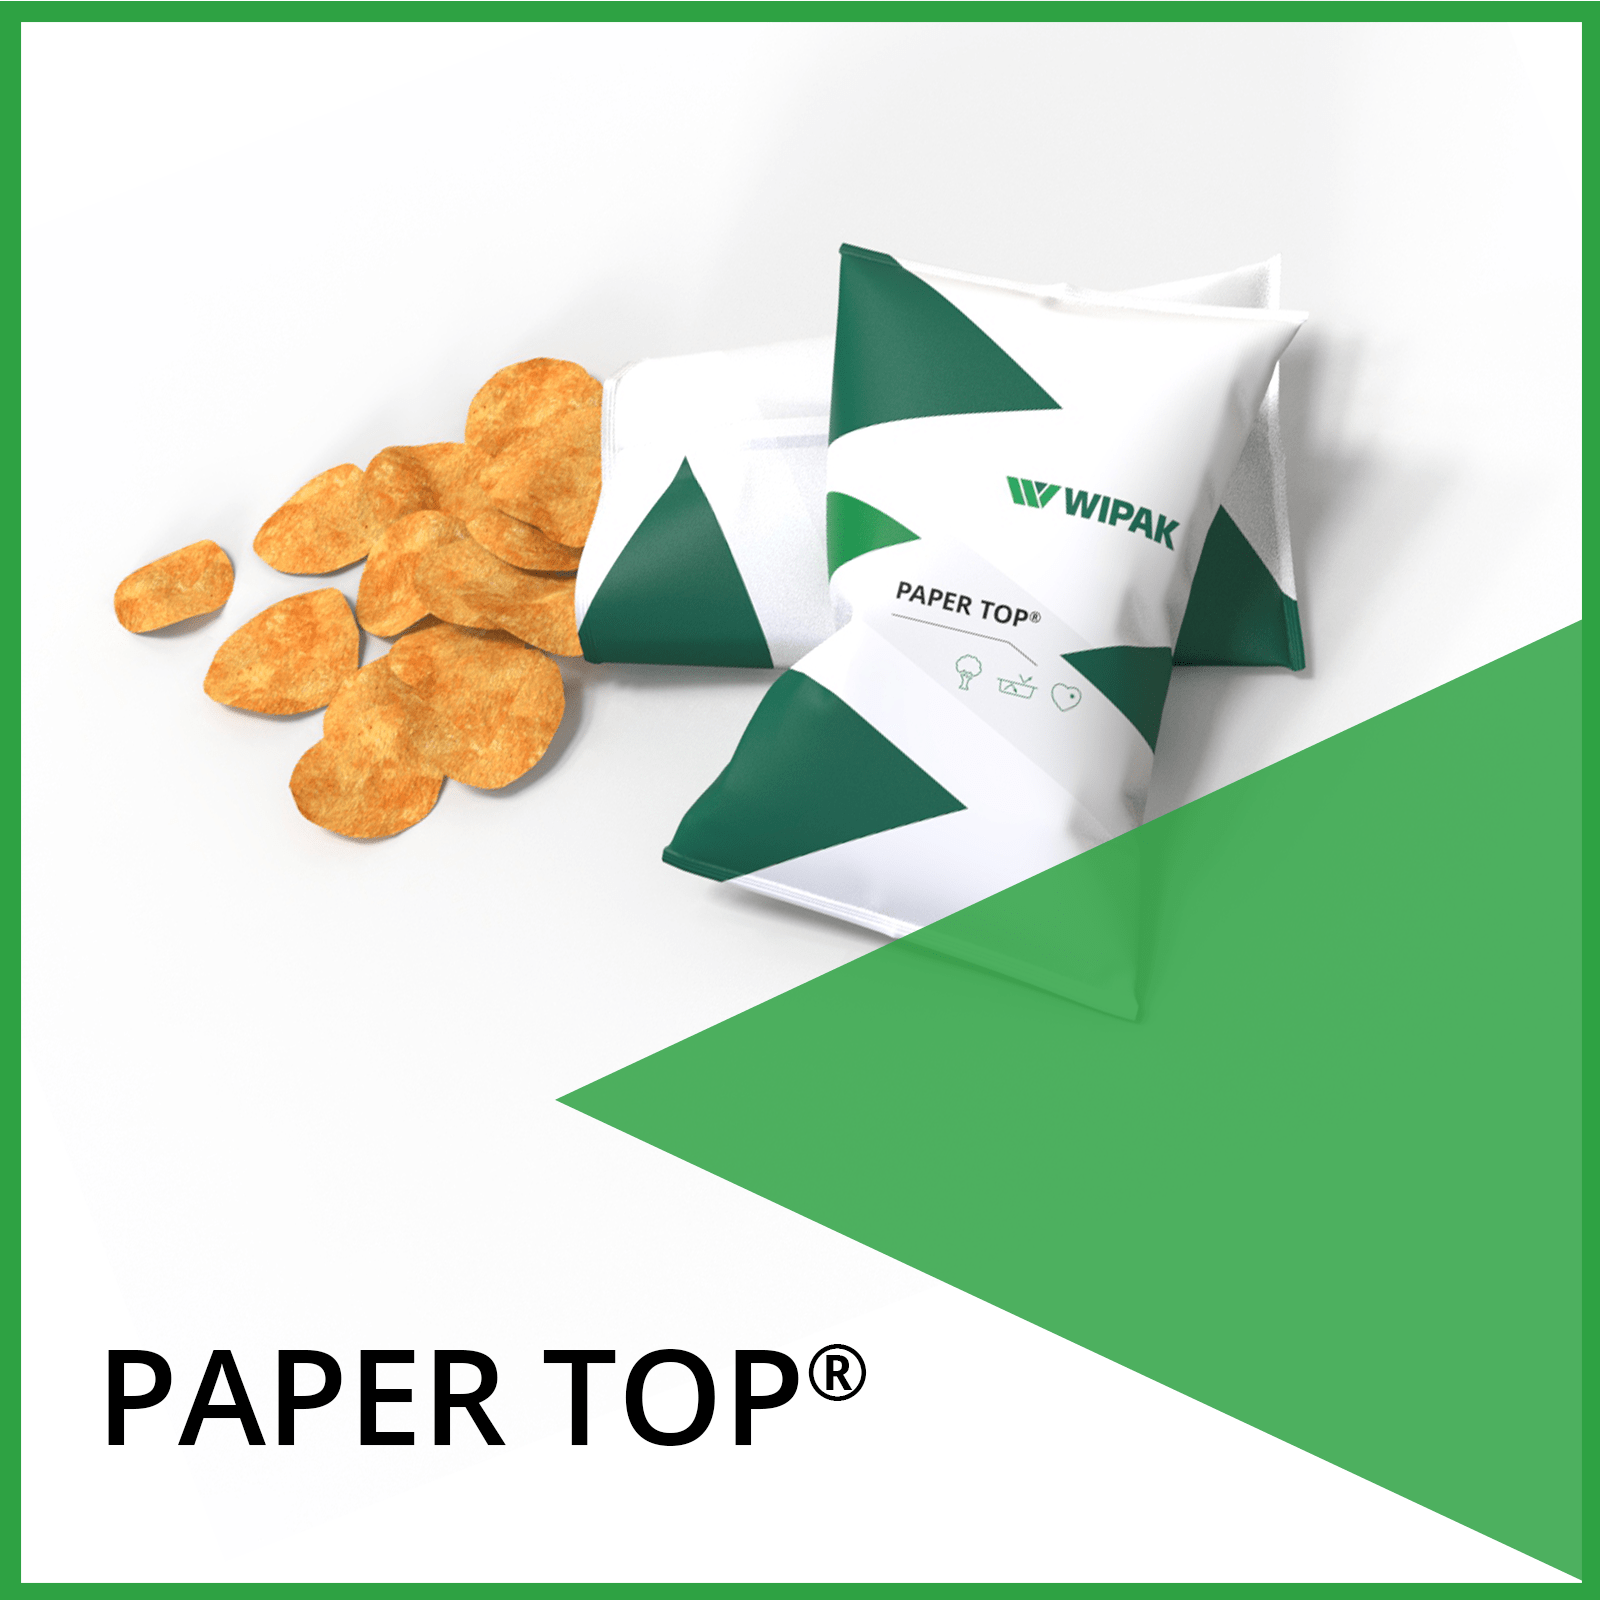 Wipak|Paper-based Solutions